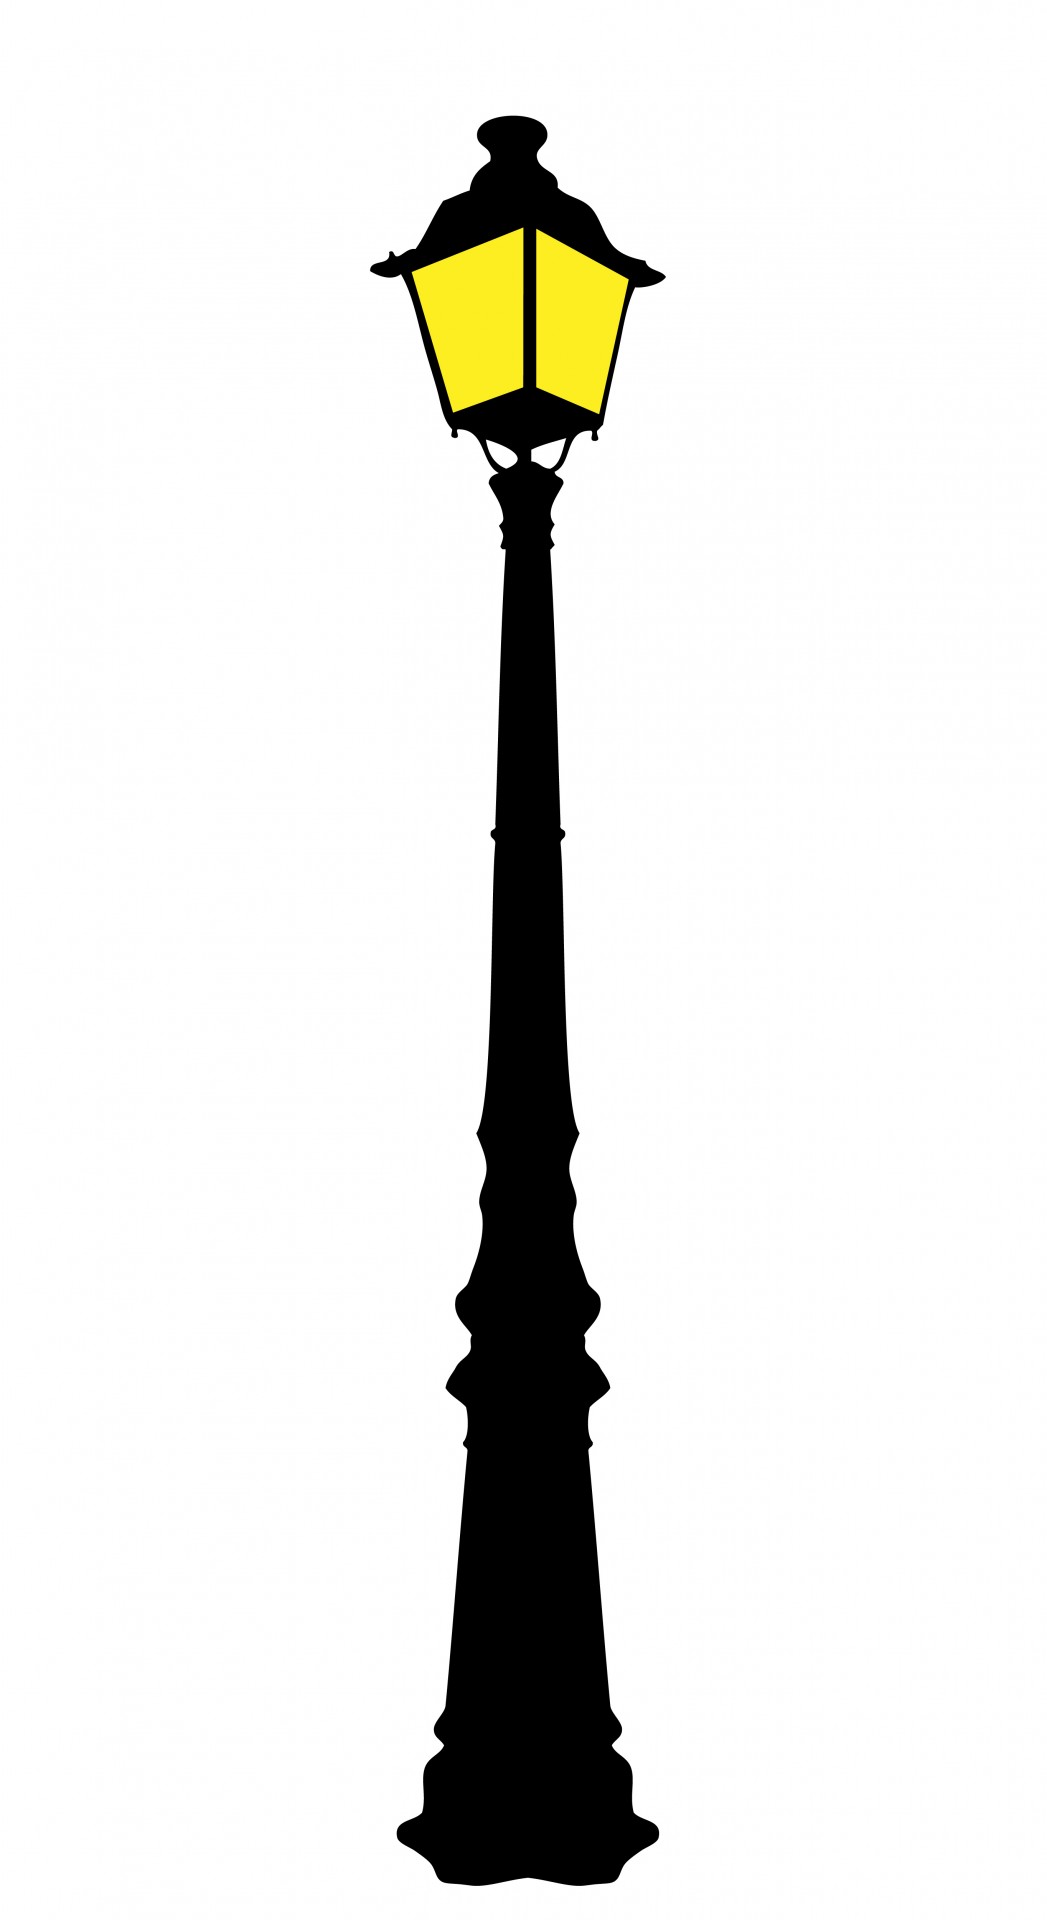 Black silhouette of a vintage street lamp lighting clipart for scrapbooking